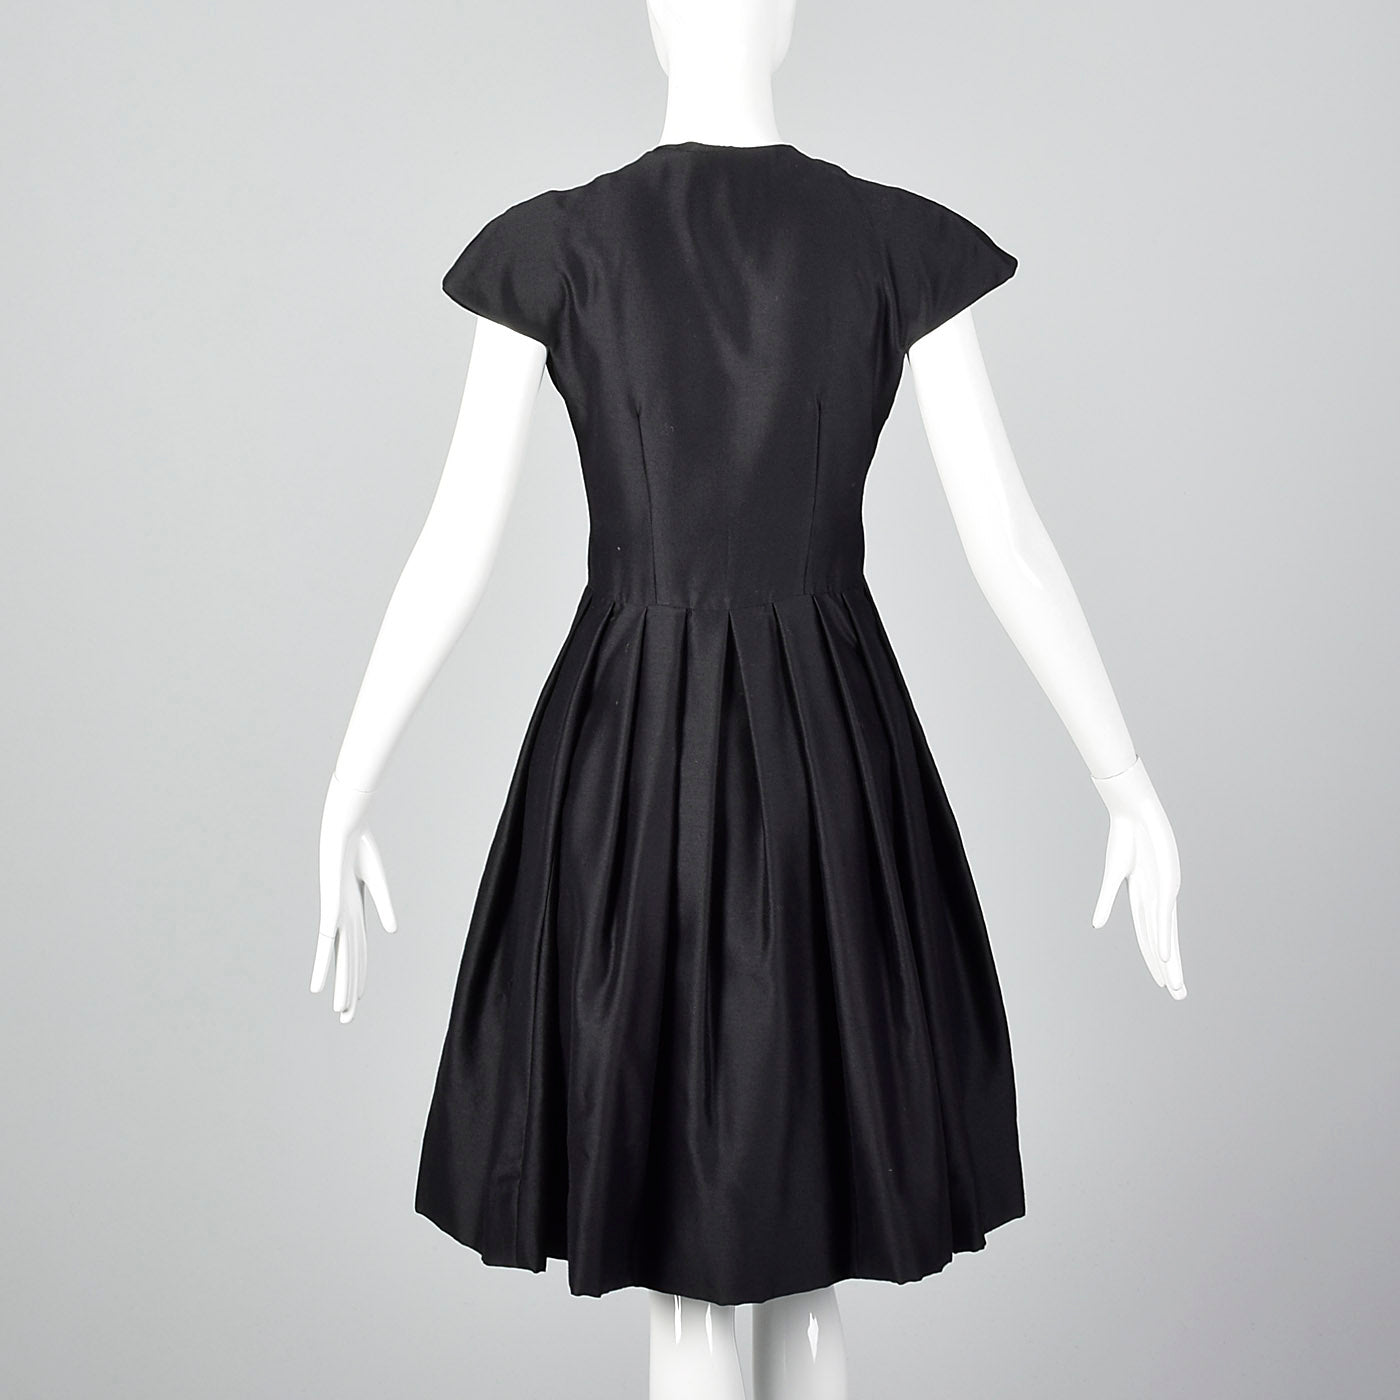 1960s Suzy Perette Black Dress with Pleated Skirt